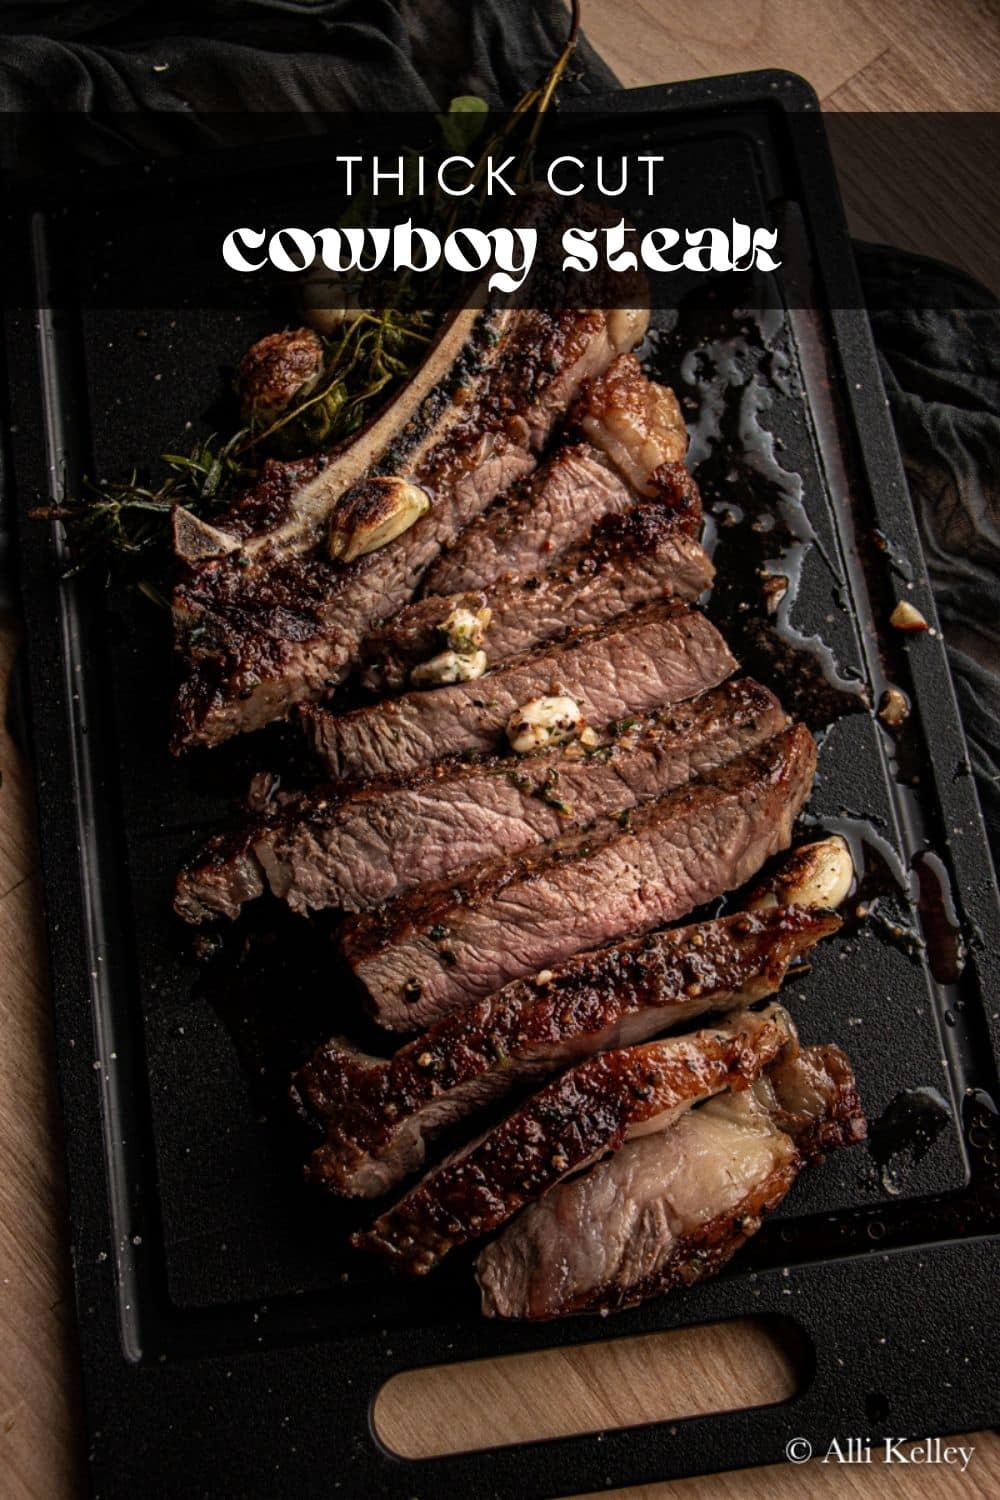 Thick-cut cowboy steak is the best treat for any steak lover! With a delicious combination of seasonings and the right cooking method, you'll be able to create a perfectly cooked steak that's full of flavor. Enjoy your cowboy cut steak with your favorite sides and condiments for an unforgettable meal!